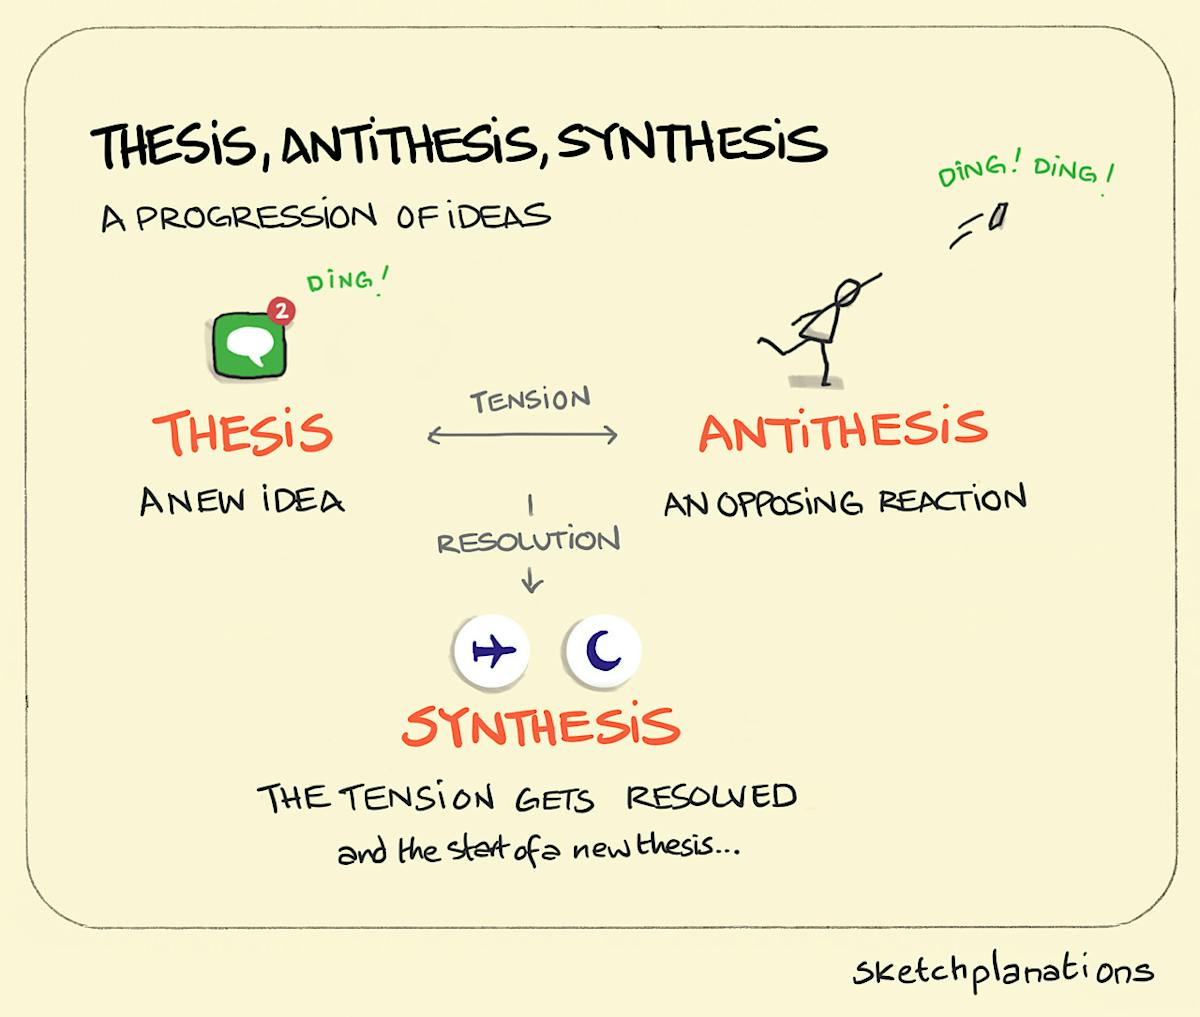 thesis antithesis and synthesis is associated with which theory